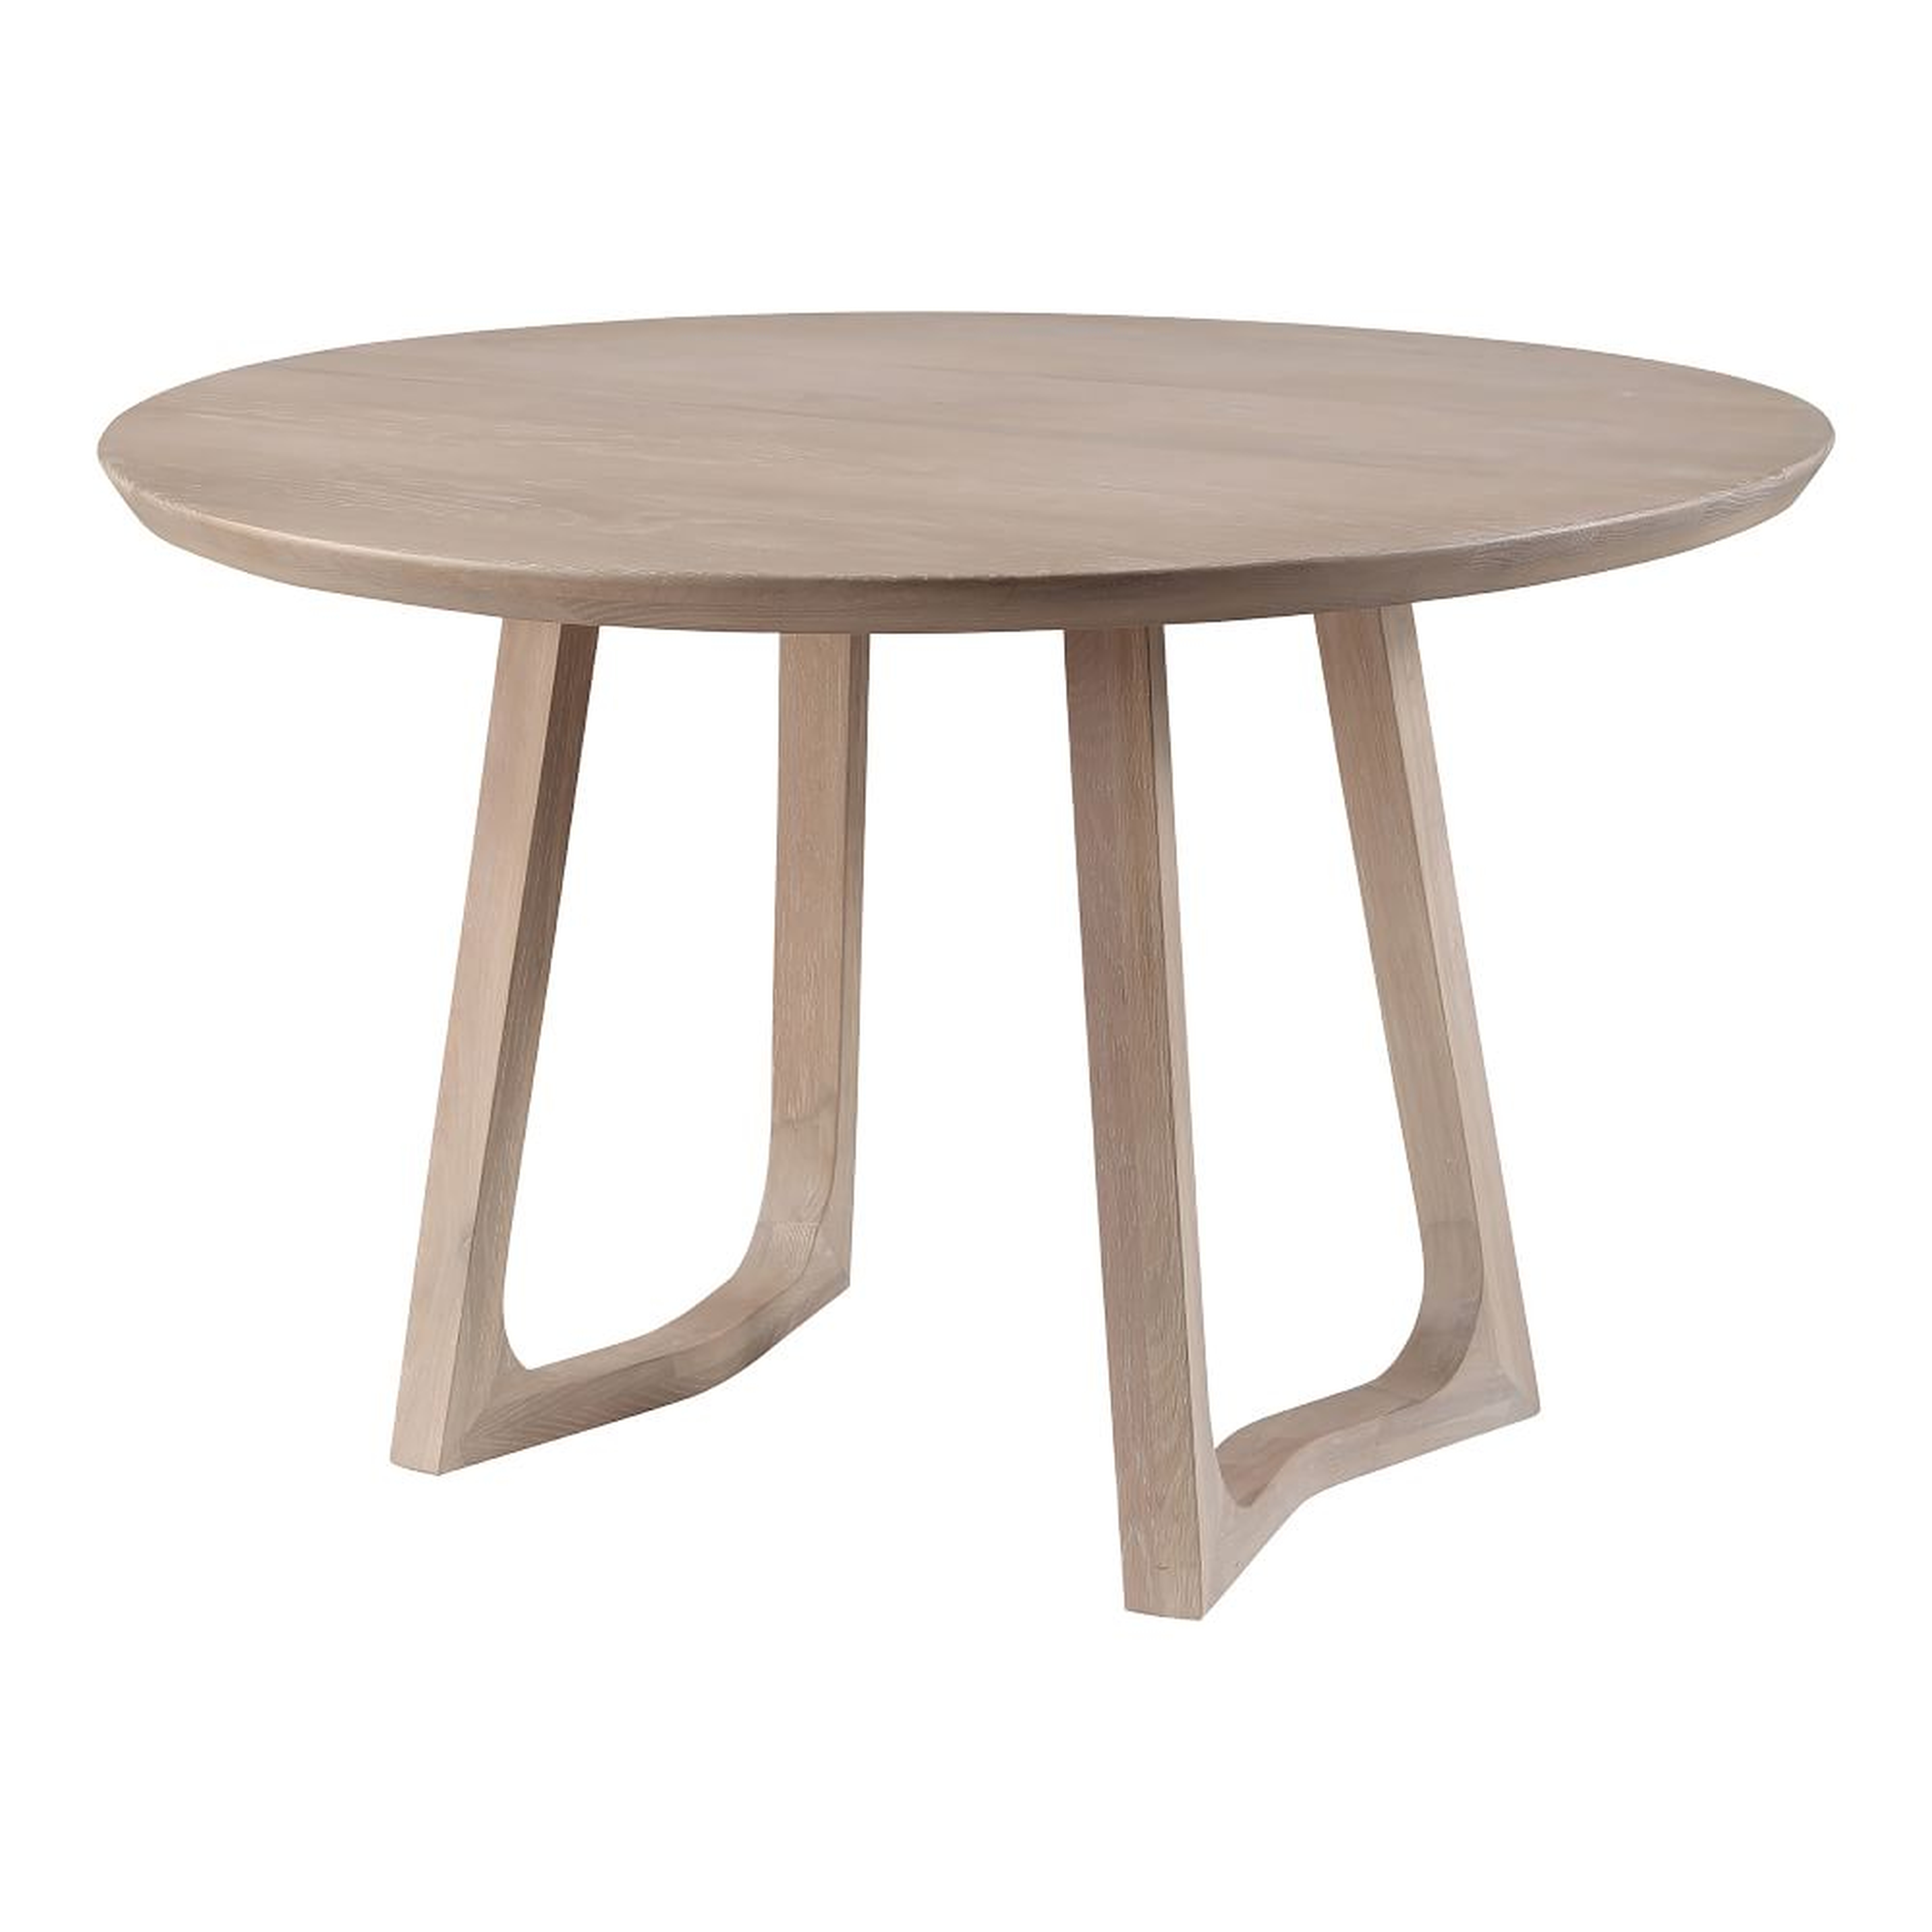 Solid White Oak Round Dining Table,Solid White Oak, - West Elm